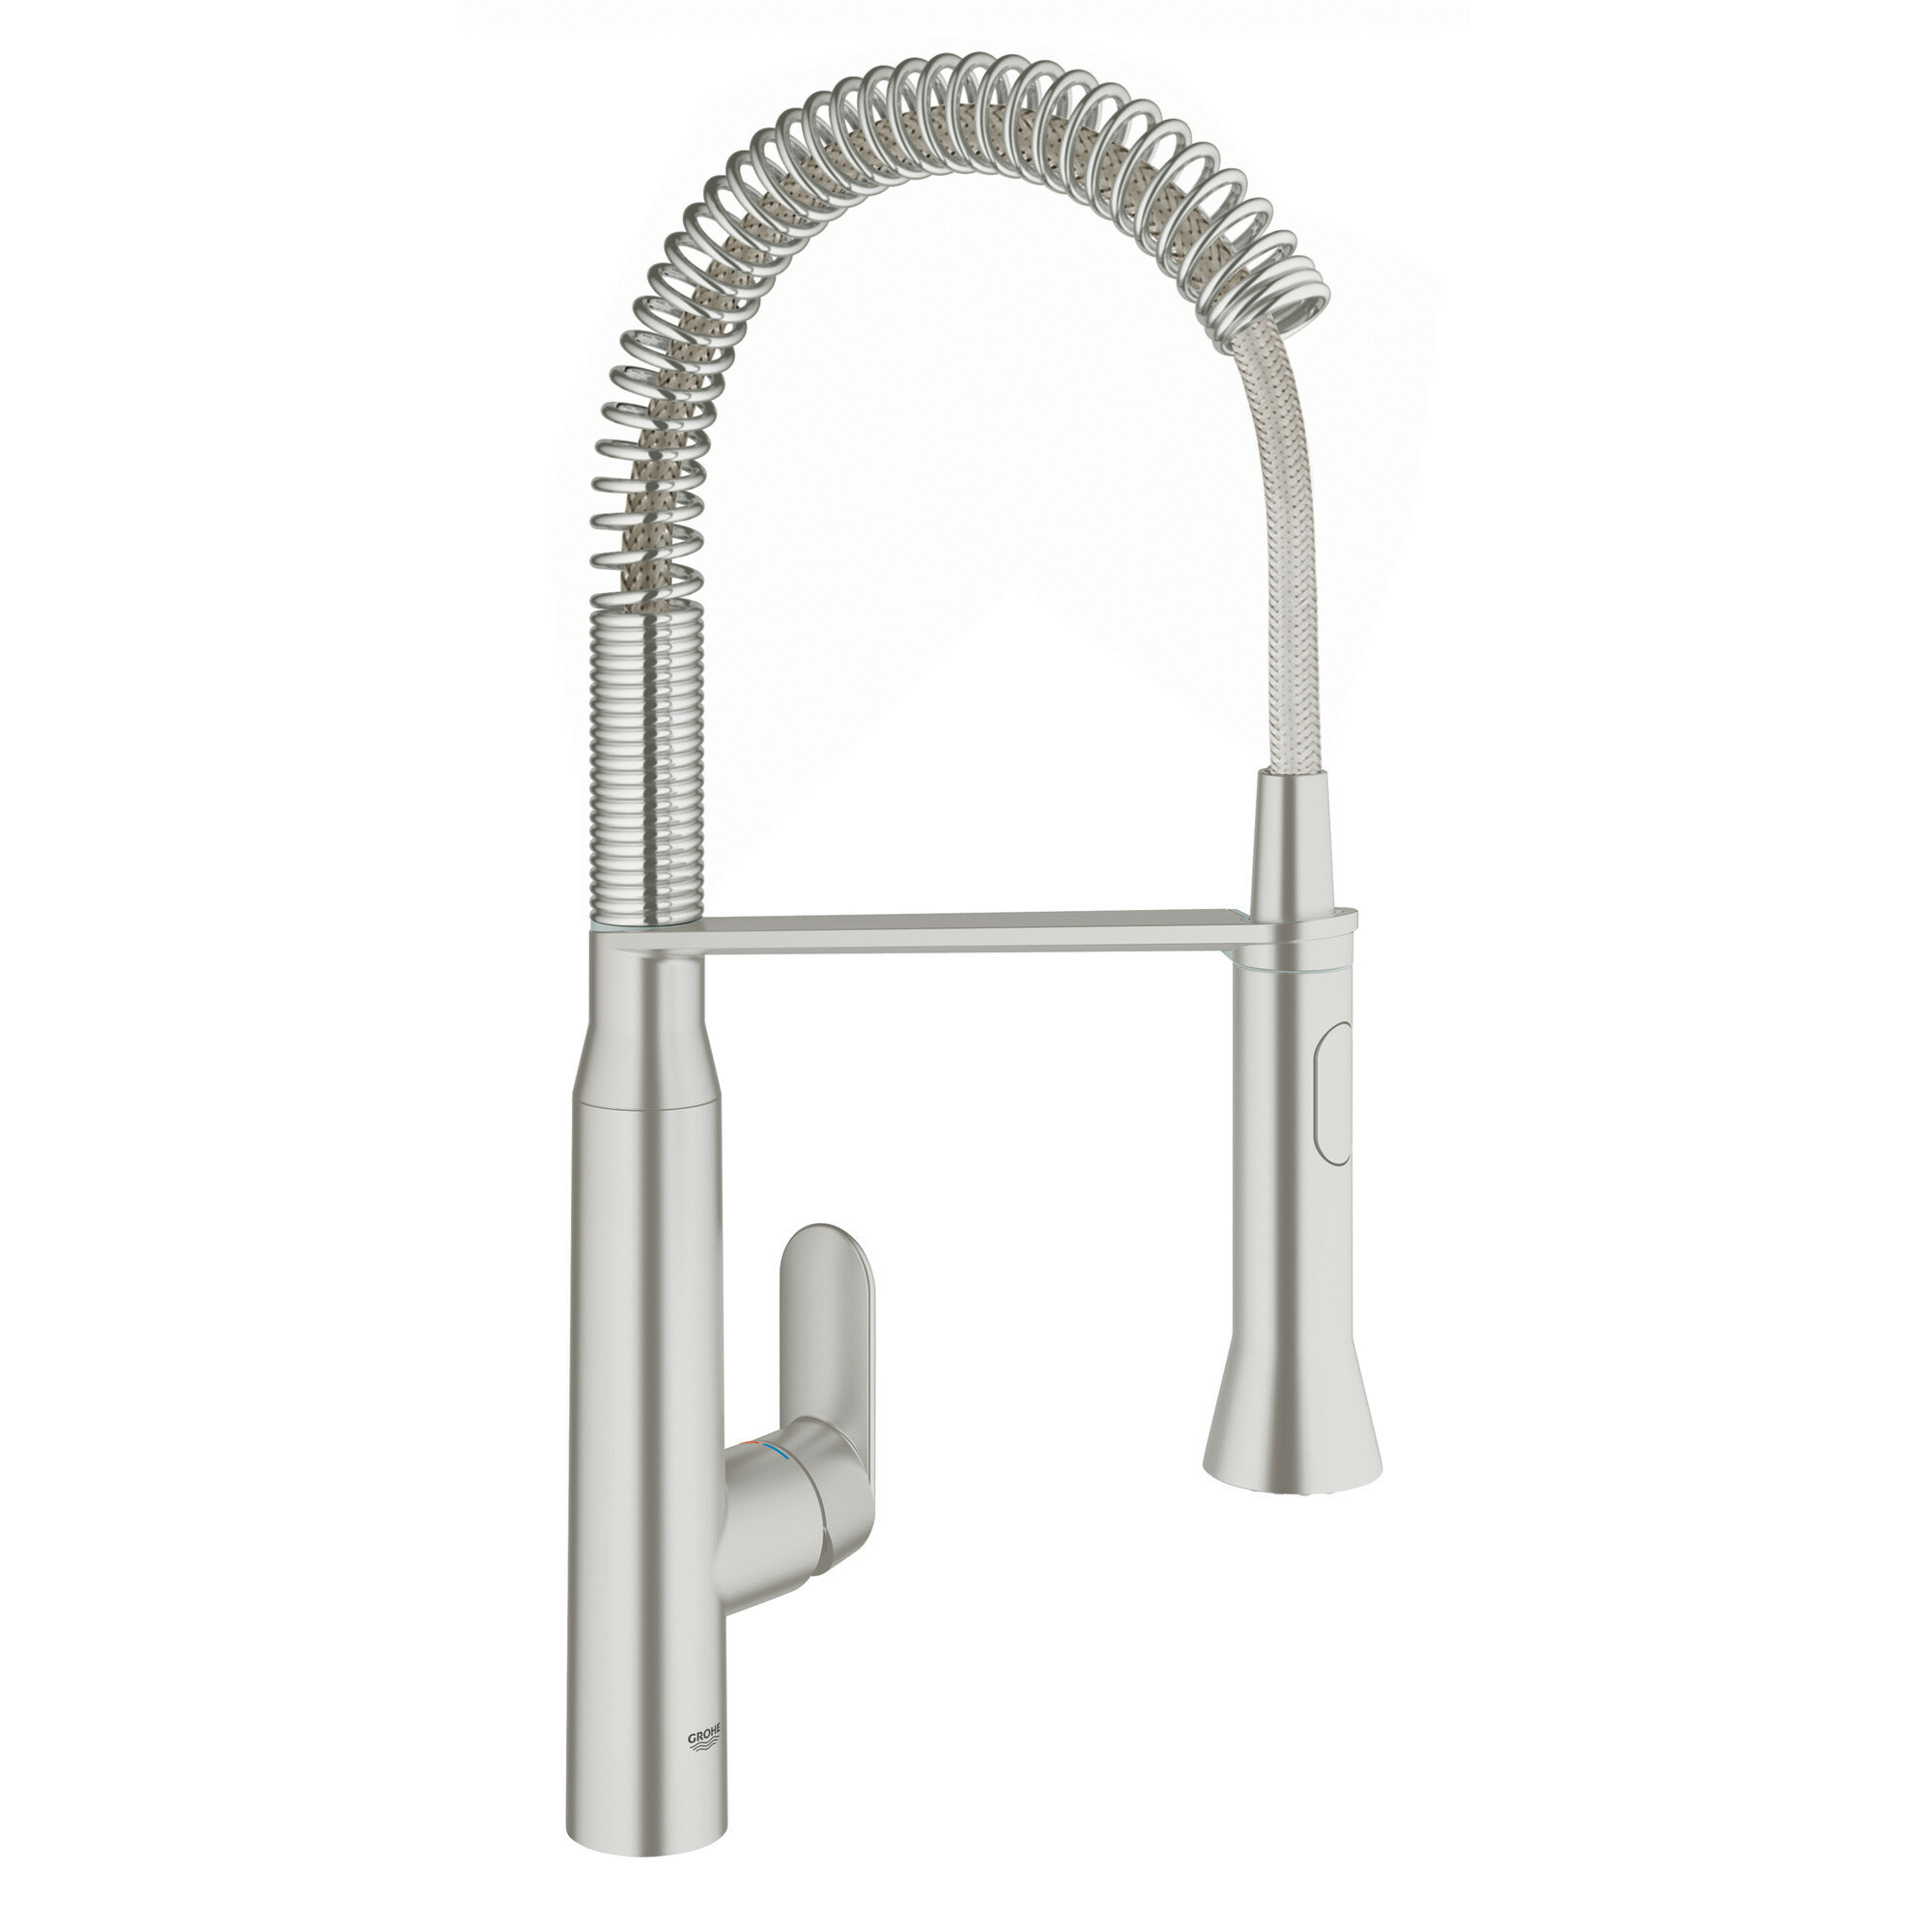 Grohe K7 Pull Down Single Handle Kitchen Faucet Reviews Wayfair